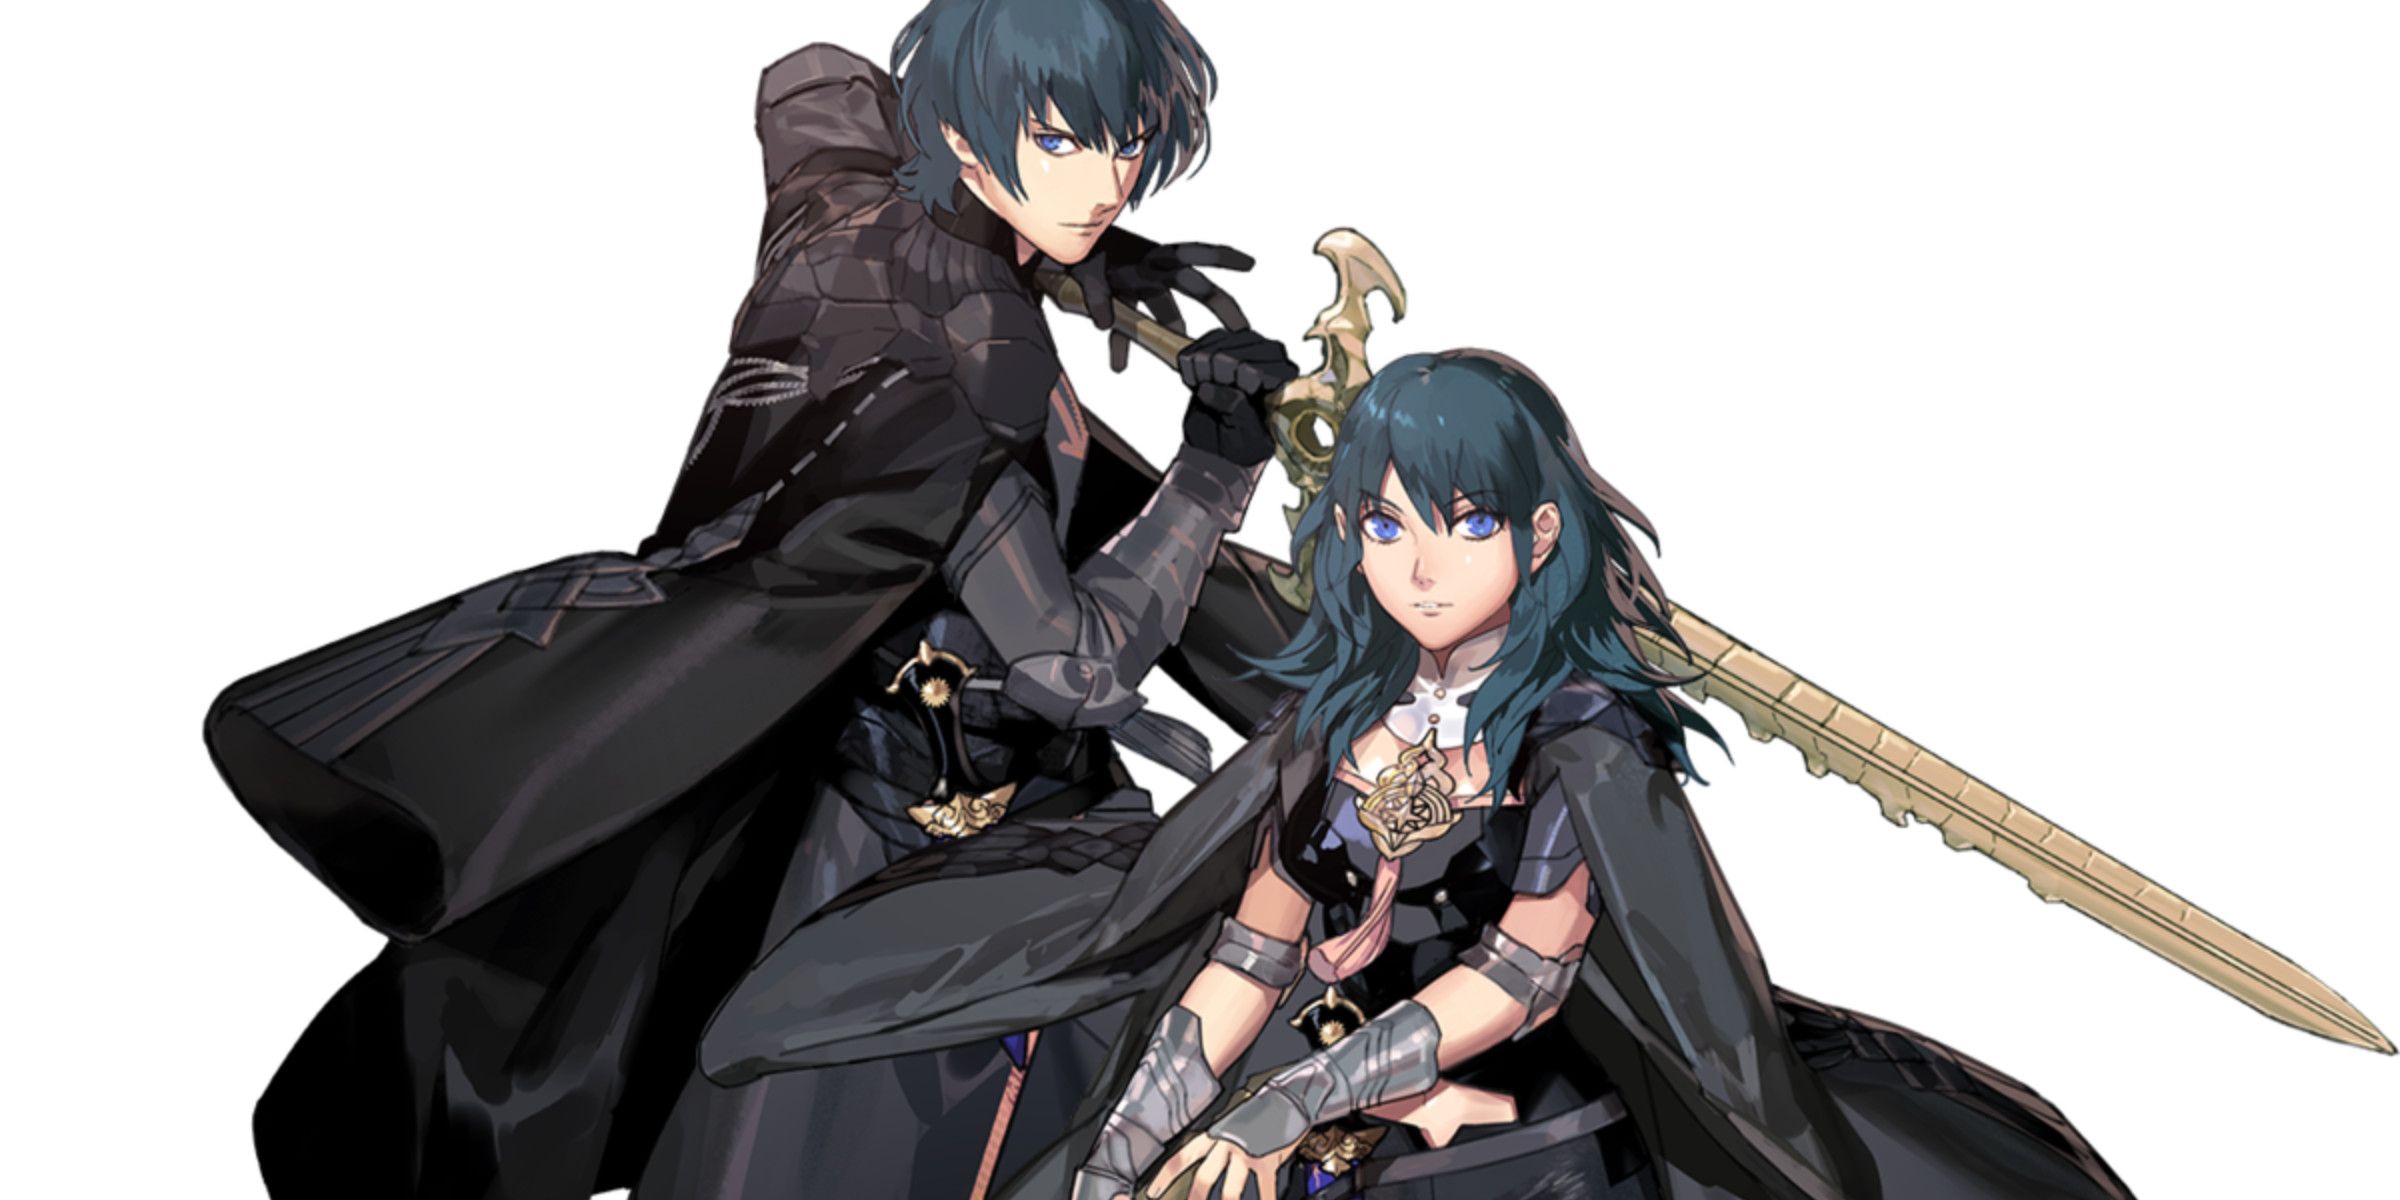 Both male and female character of protagonist from Three Houses weilding the Sword of the Creator